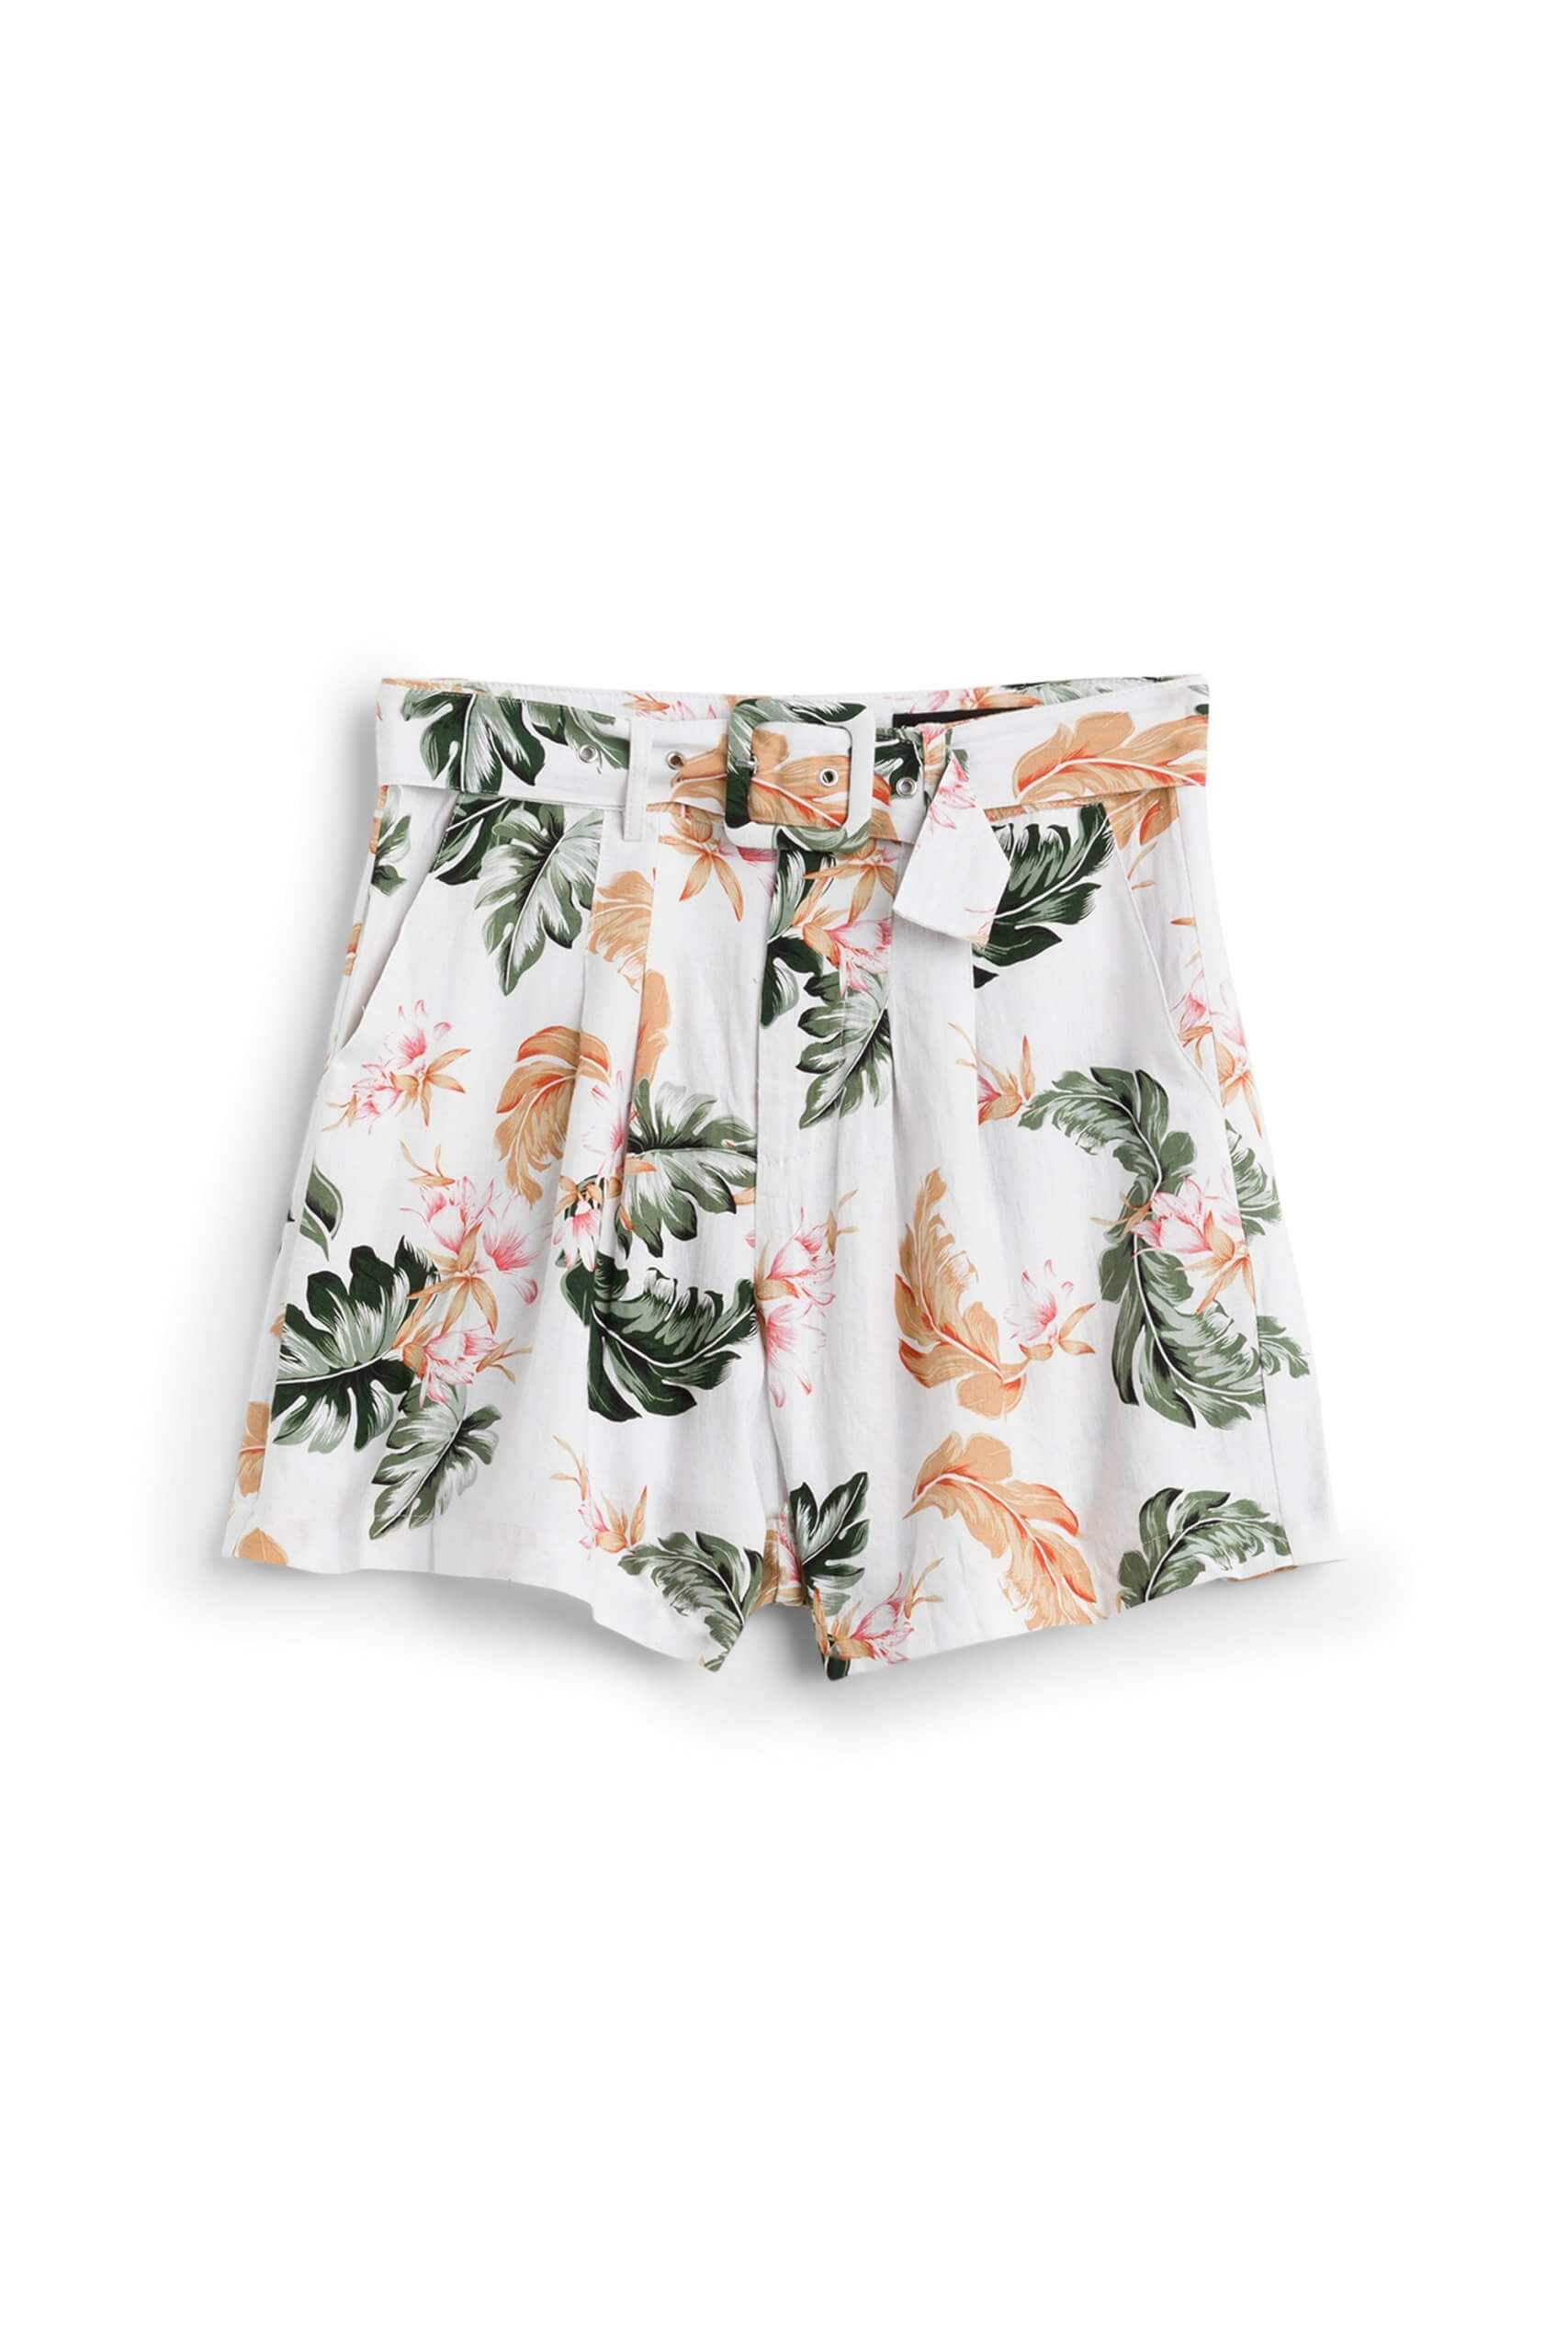 Stitch Fix Women’s white, olive and orange tropical floral print shorts with belted waist.